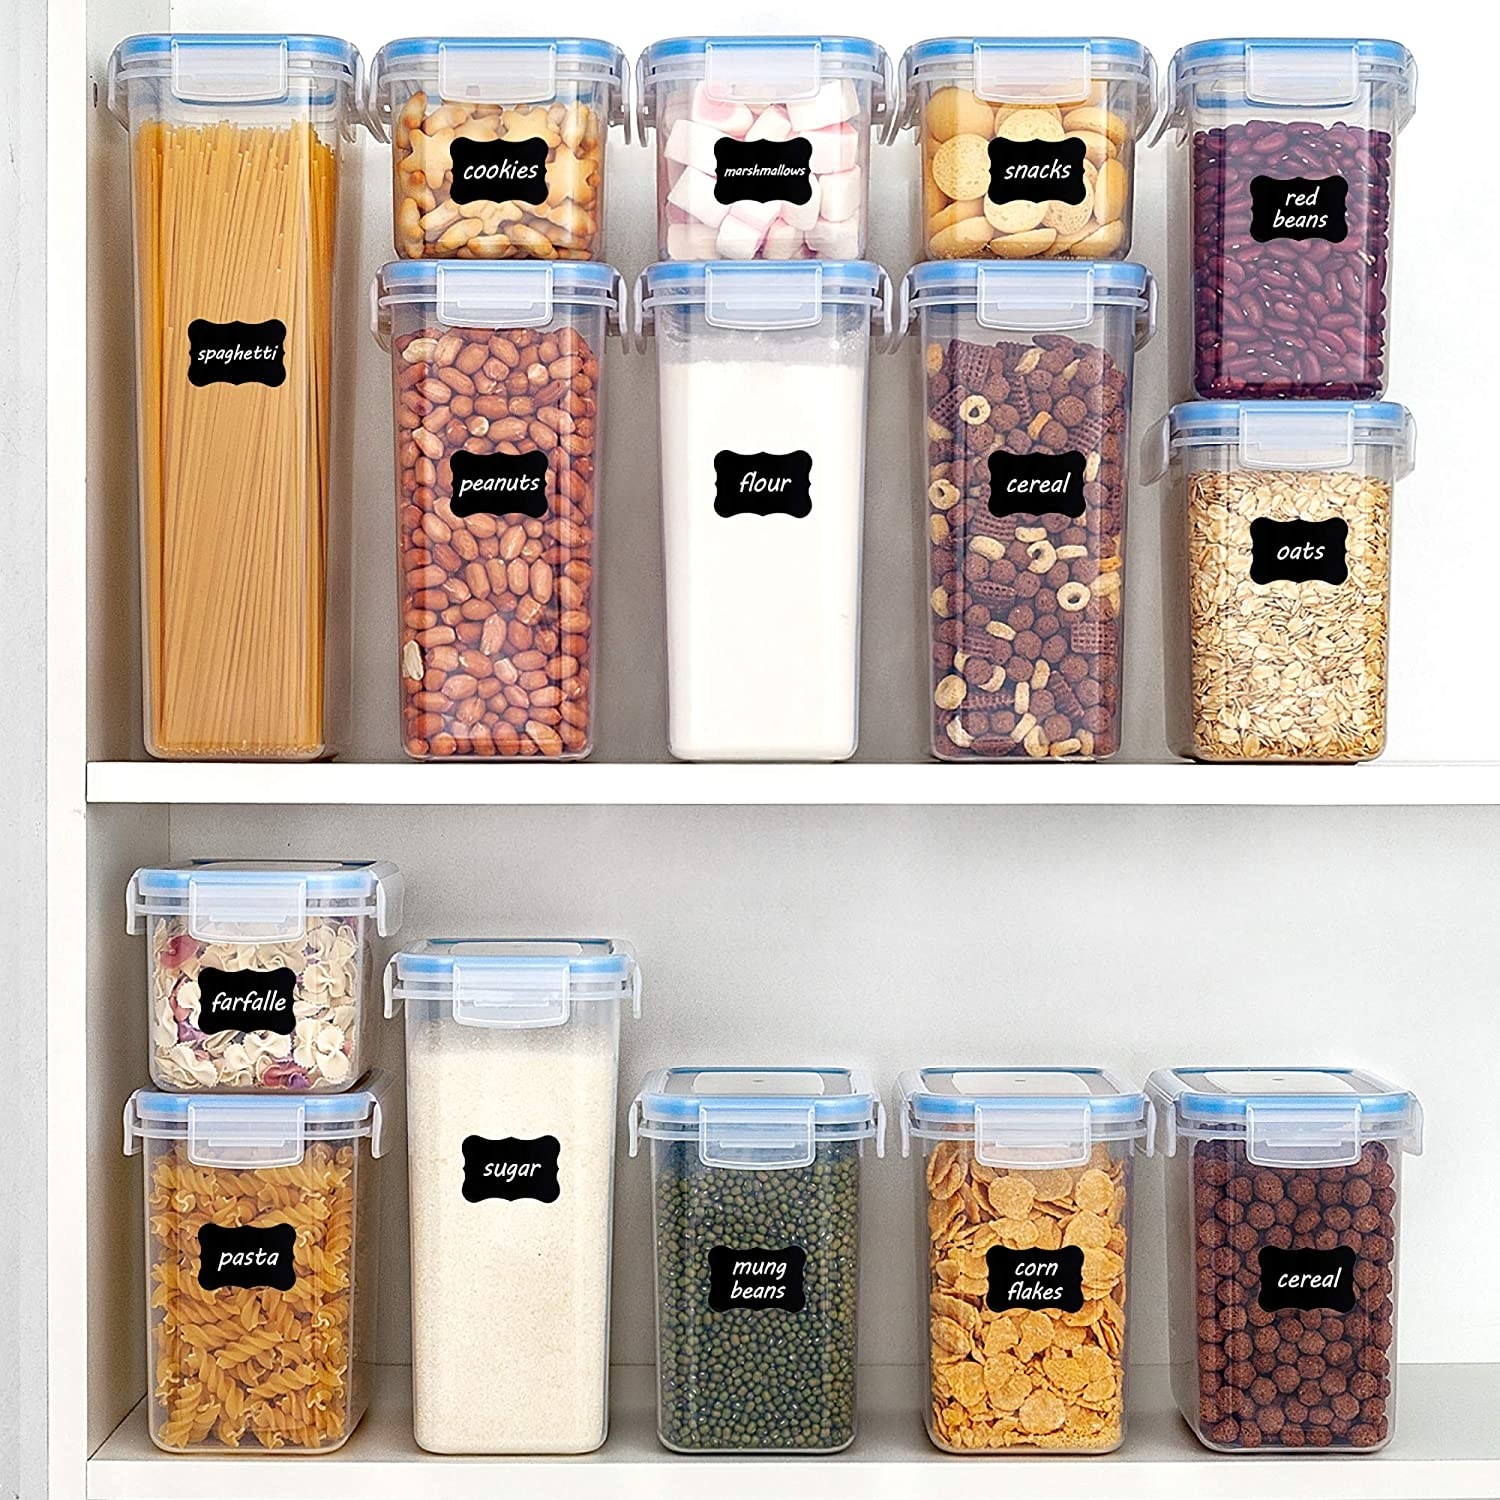 Mdesign Clarity Acrylic Kitchen Apothecary Airtight Canister Jars